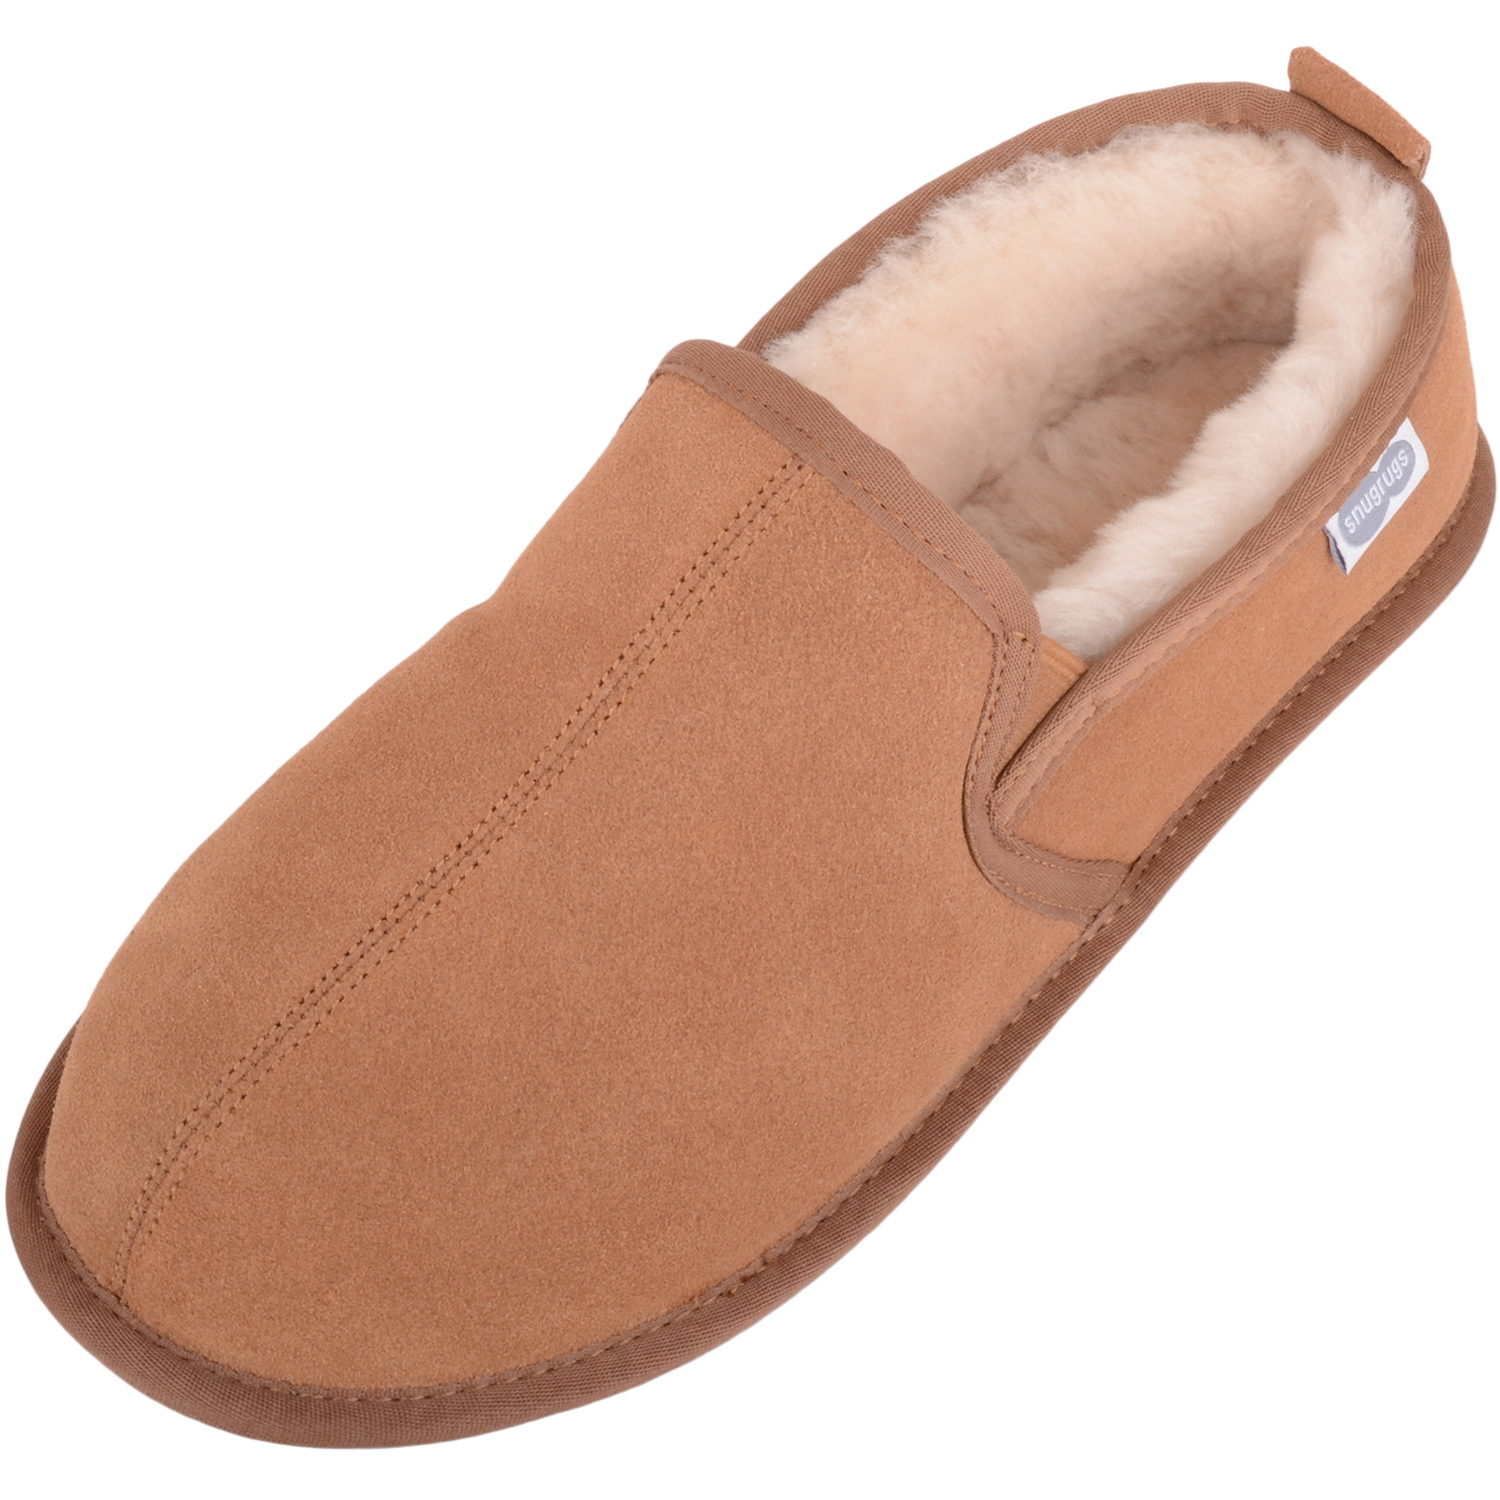 Suede Slippers | Gifts for Him | Mens Slippers by MULO shoes-saigonsouth.com.vn